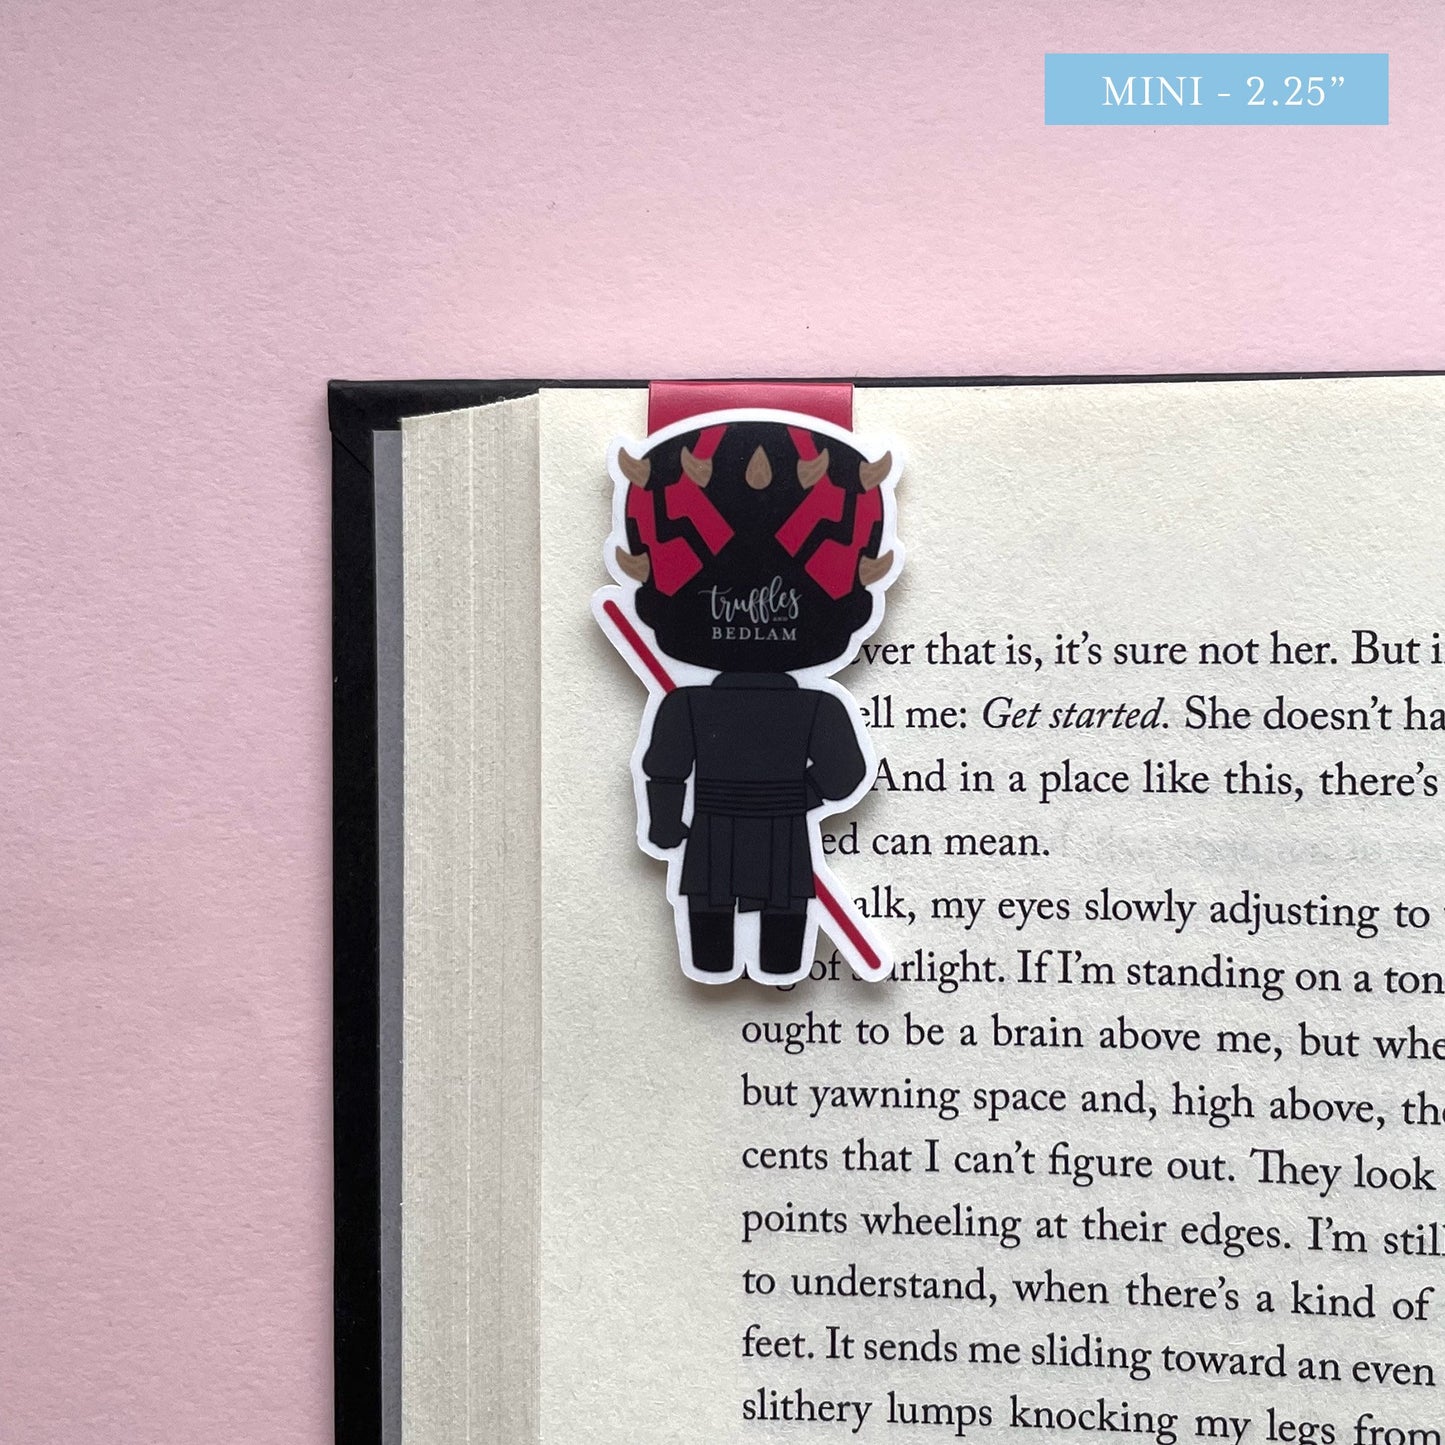 Space Wizards TPM "Maul" Magnetic Bookmark